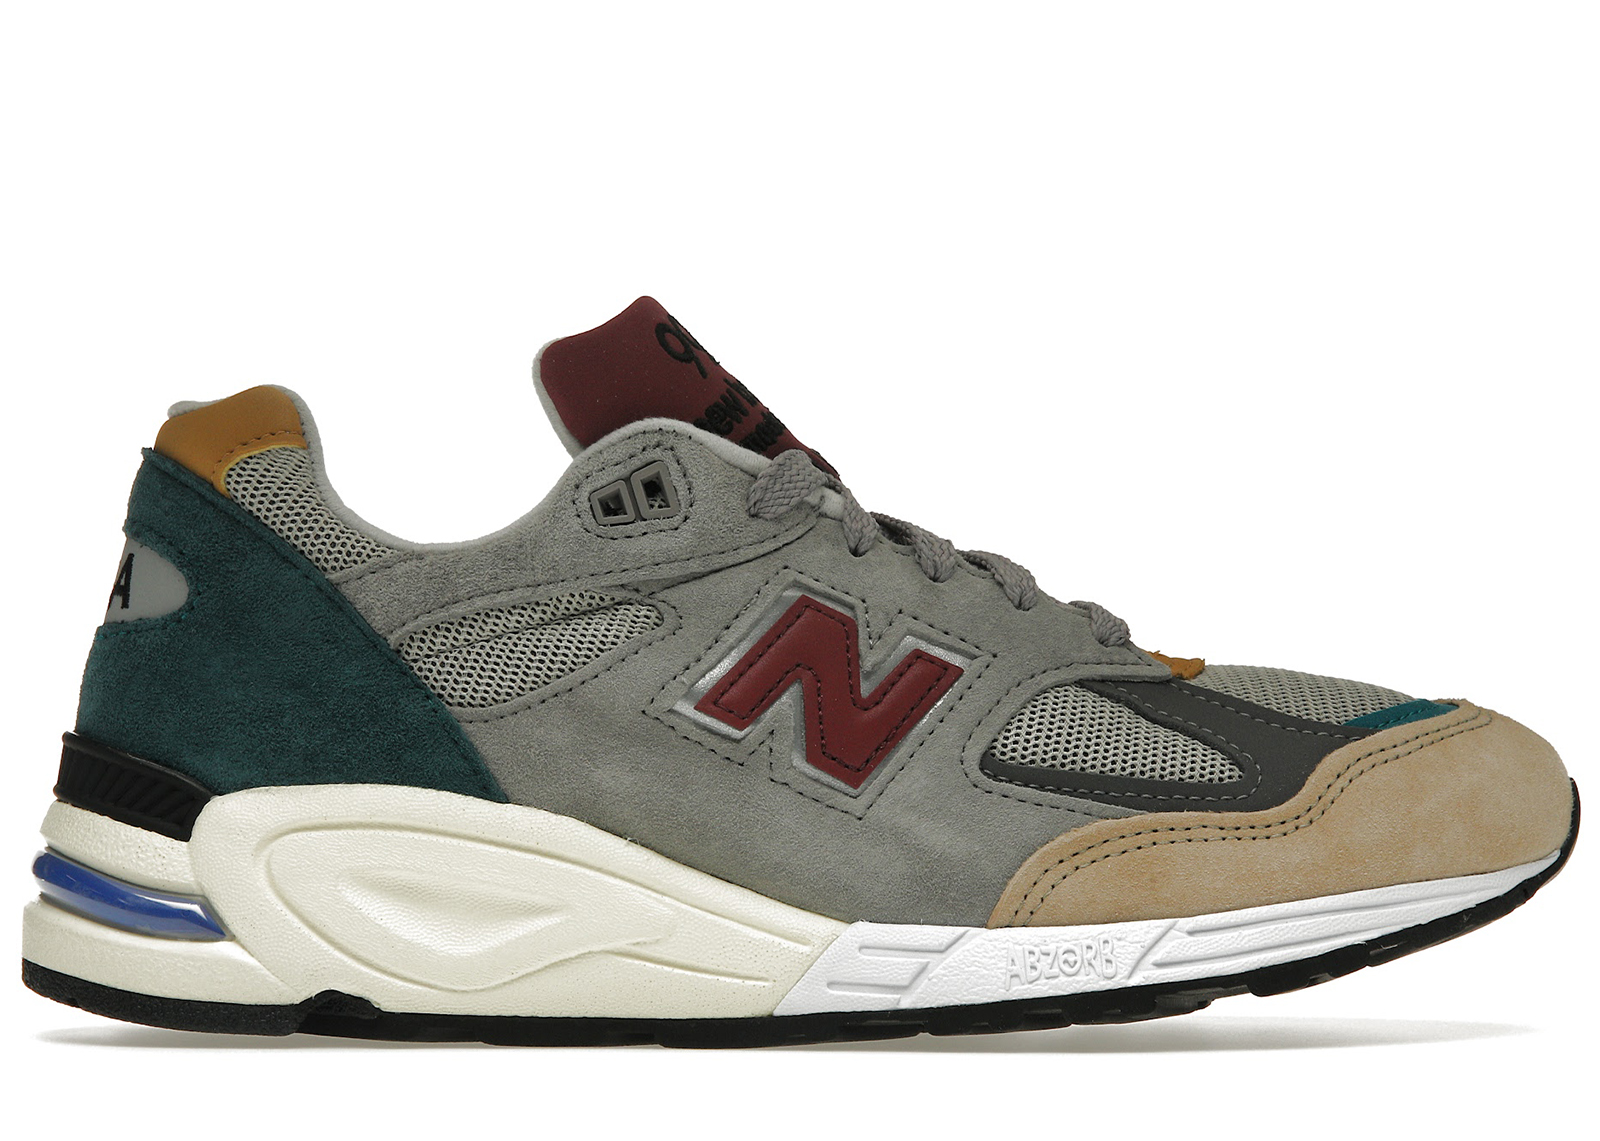 Buy New Balance 990v2 Shoes & New Sneakers - StockX